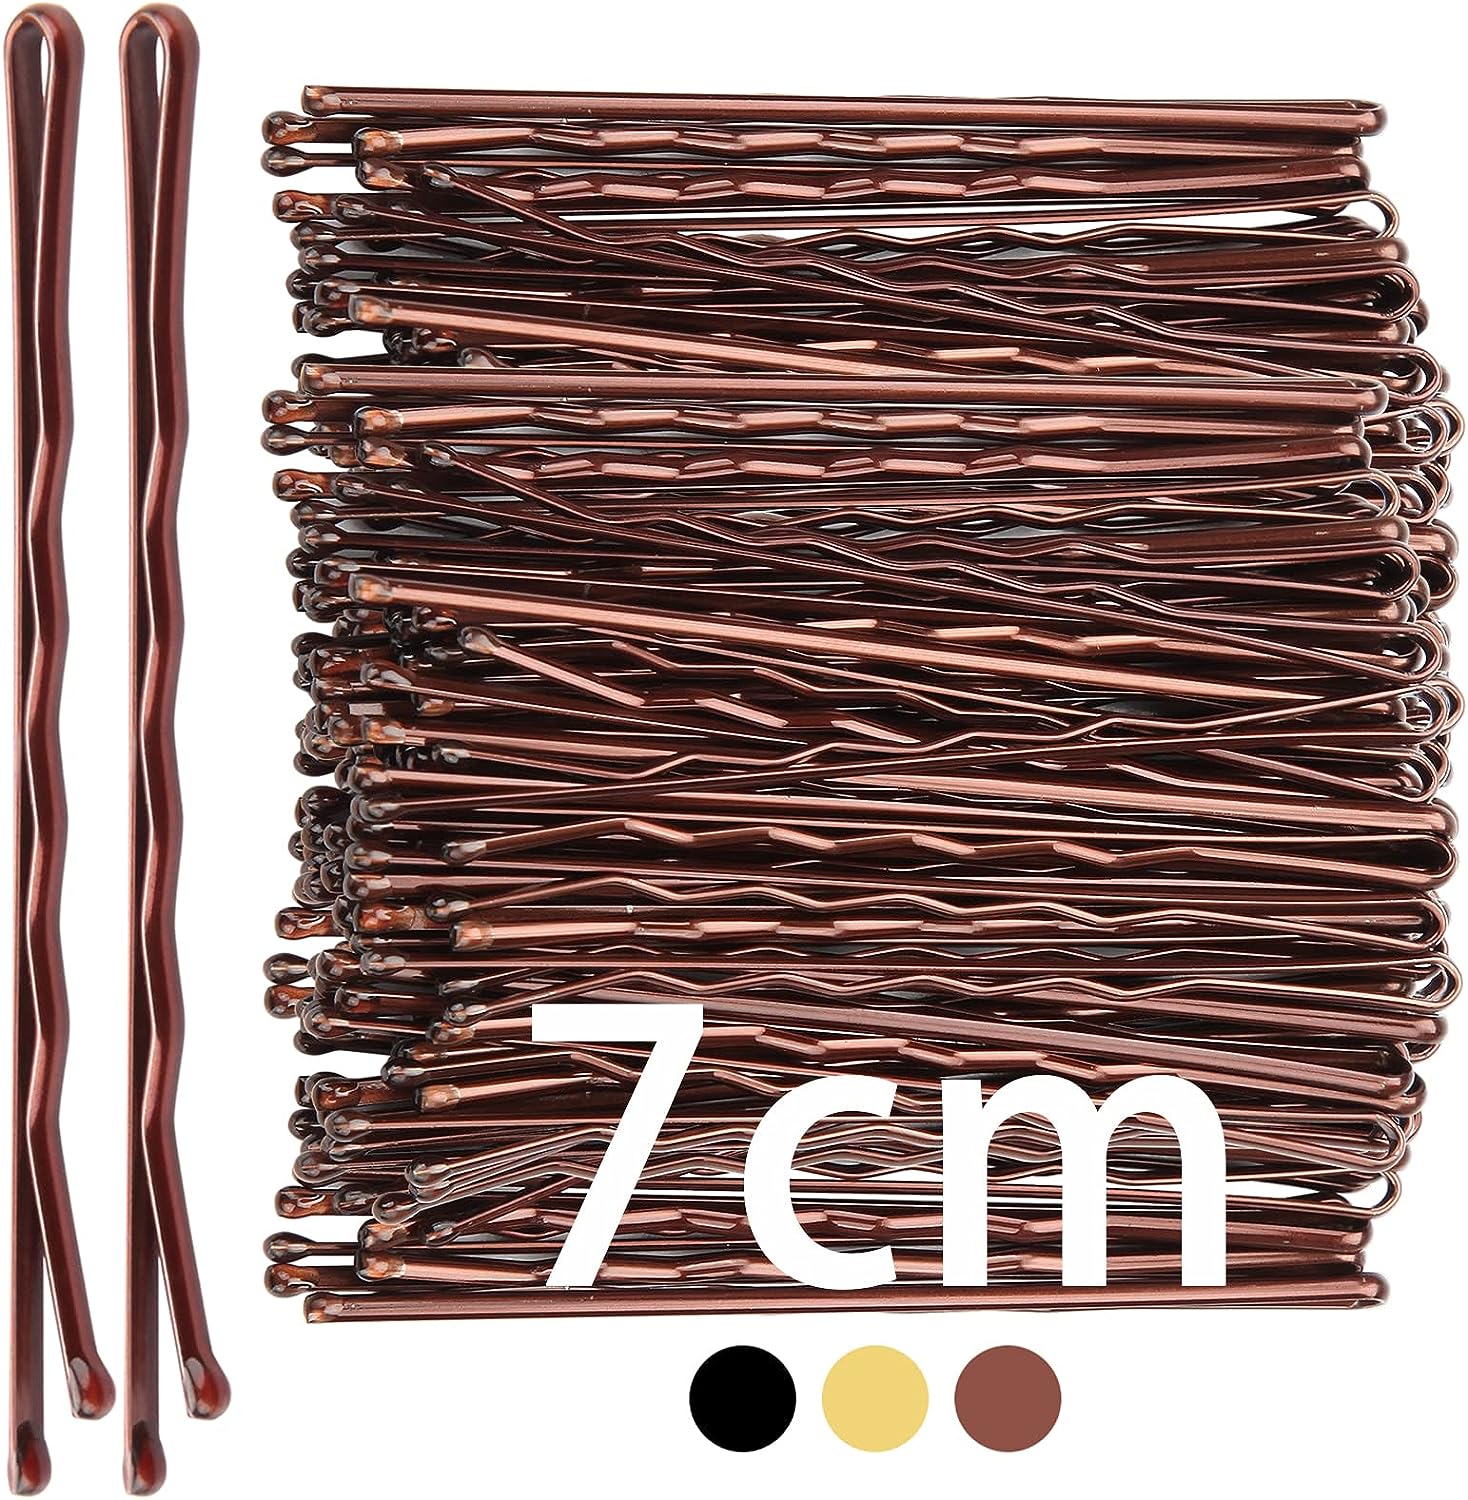 TOCOLES 7cm Hair Grips - 50pcs Brown Hair Pins, Long Bobby Pins, Waved Kirby Grips - Essential Hair Accessories for Women & Girls, Ideal for All Types